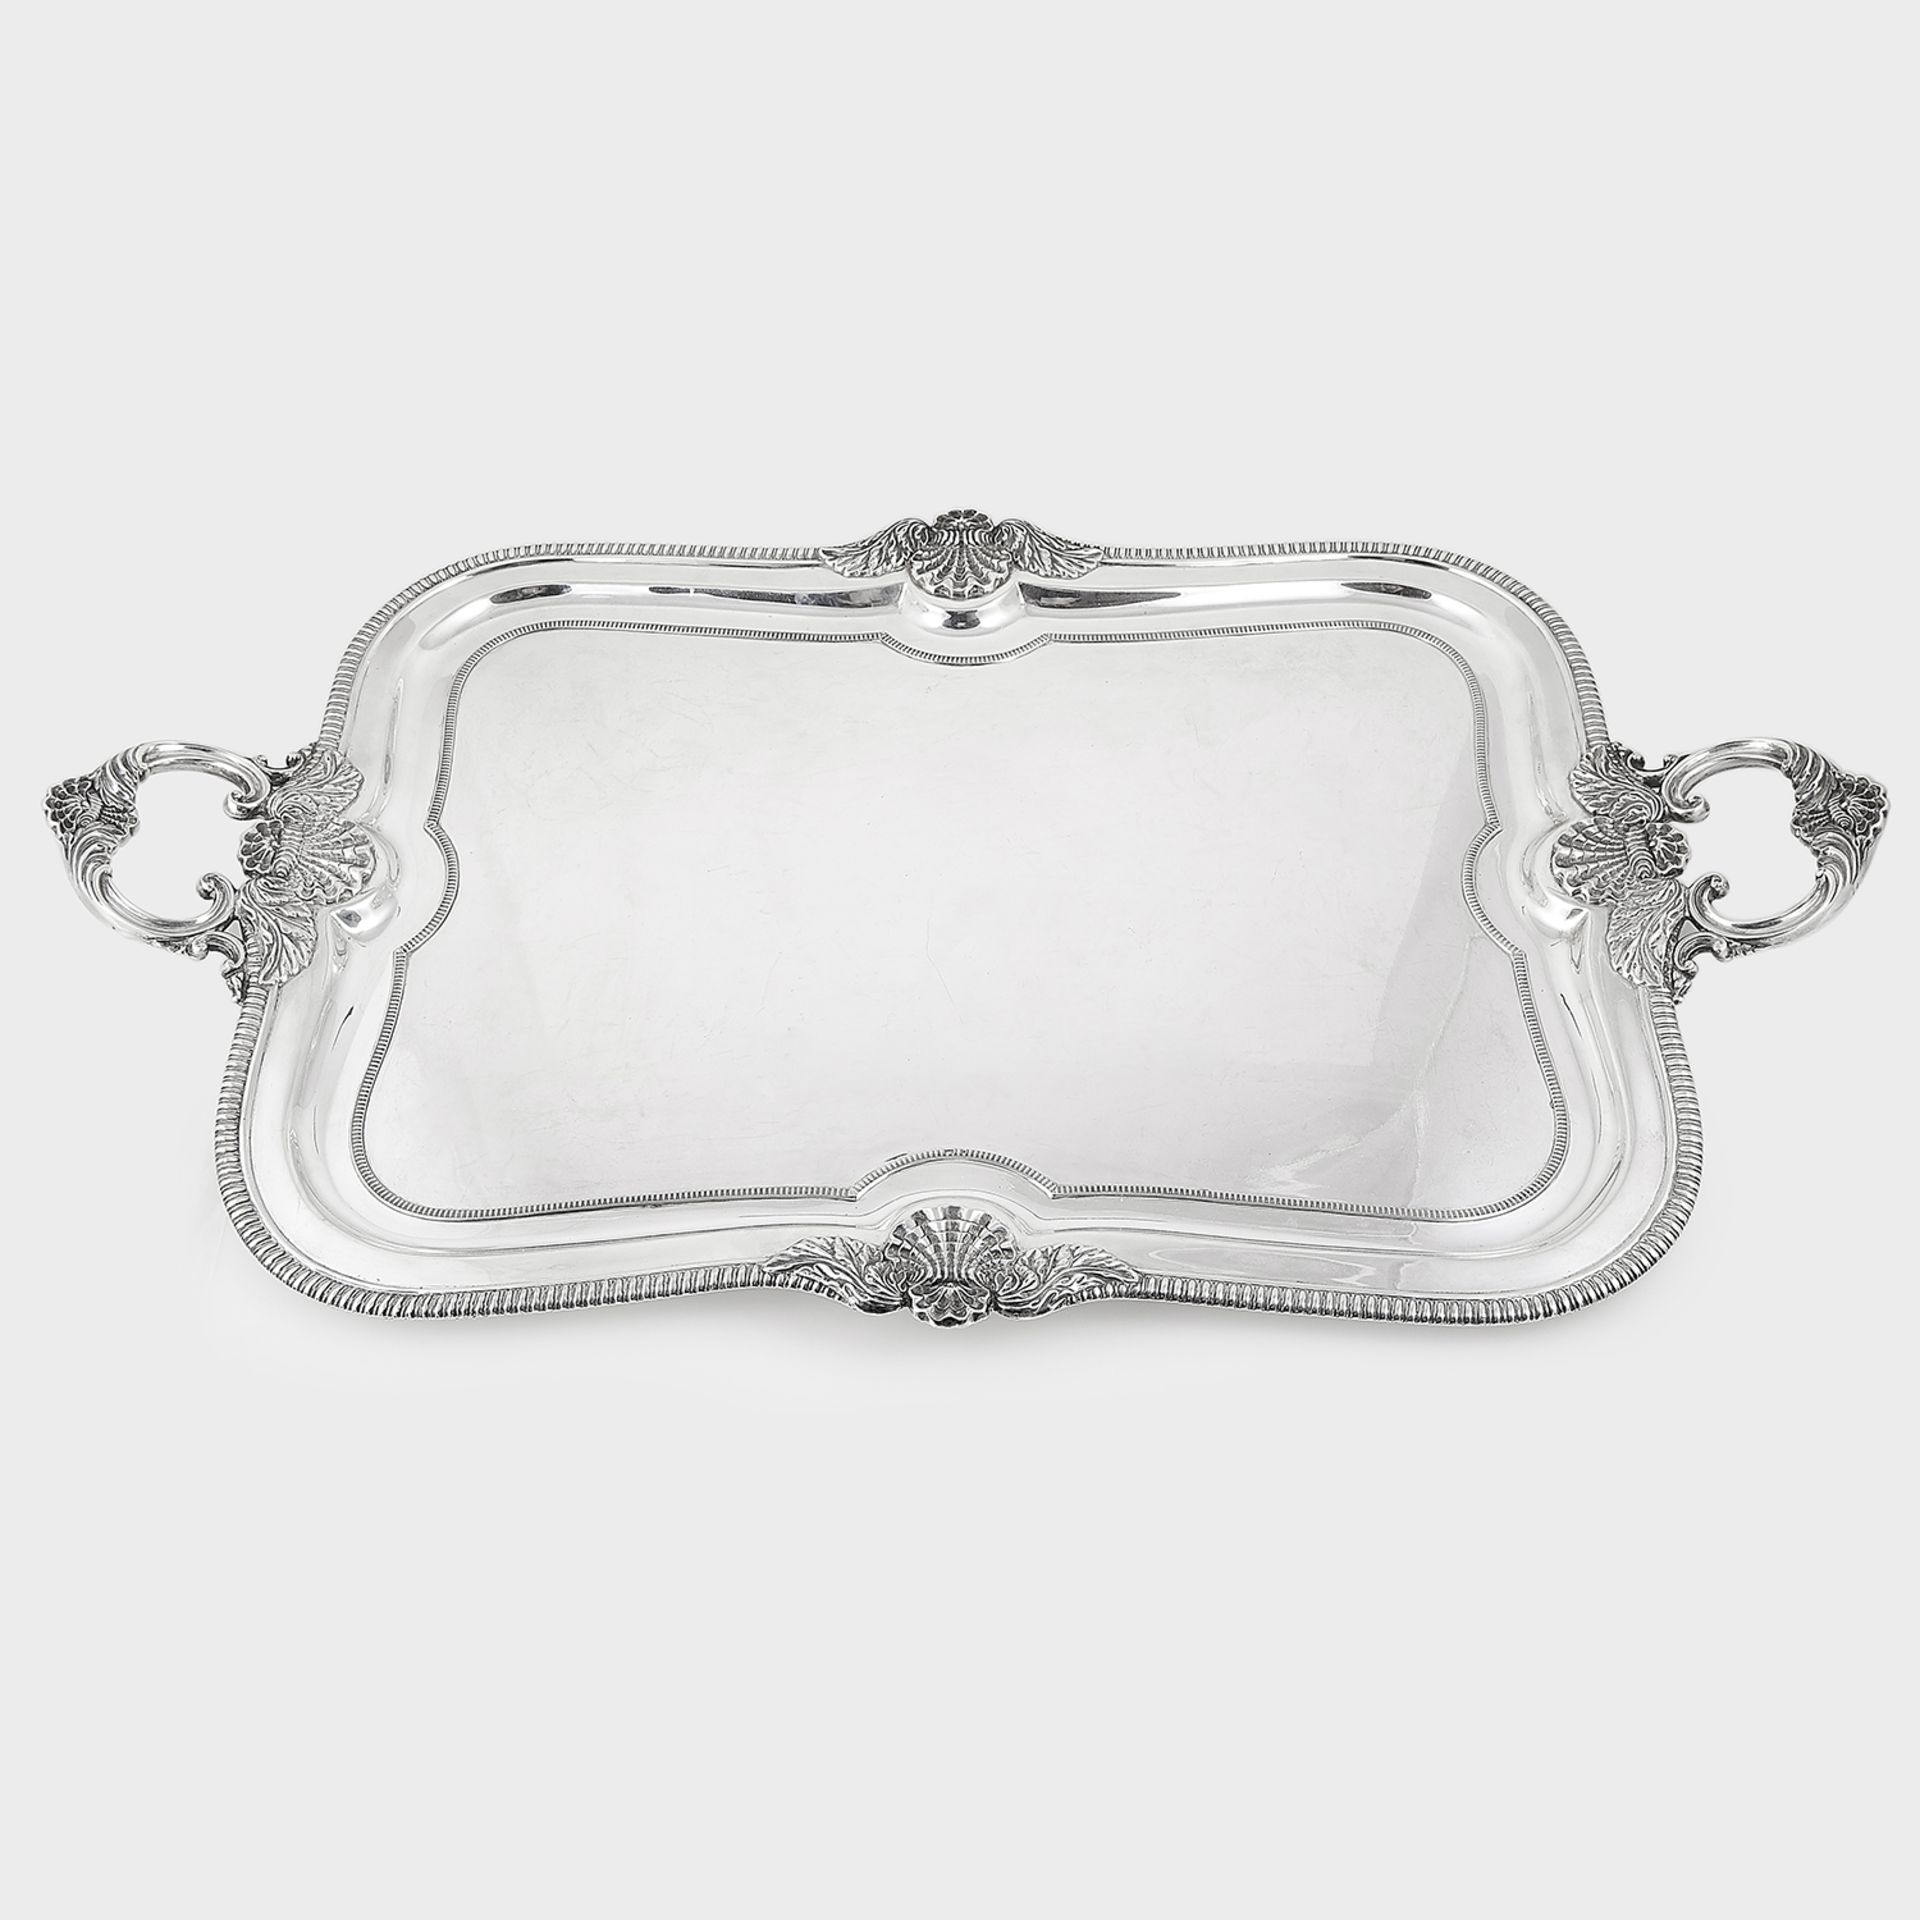 ANTIQUE GEORGE V STERLING SILVER TEA TRAY, MAPPIN & WEBB, SHEFFIELD 1924 rounded rectangular form